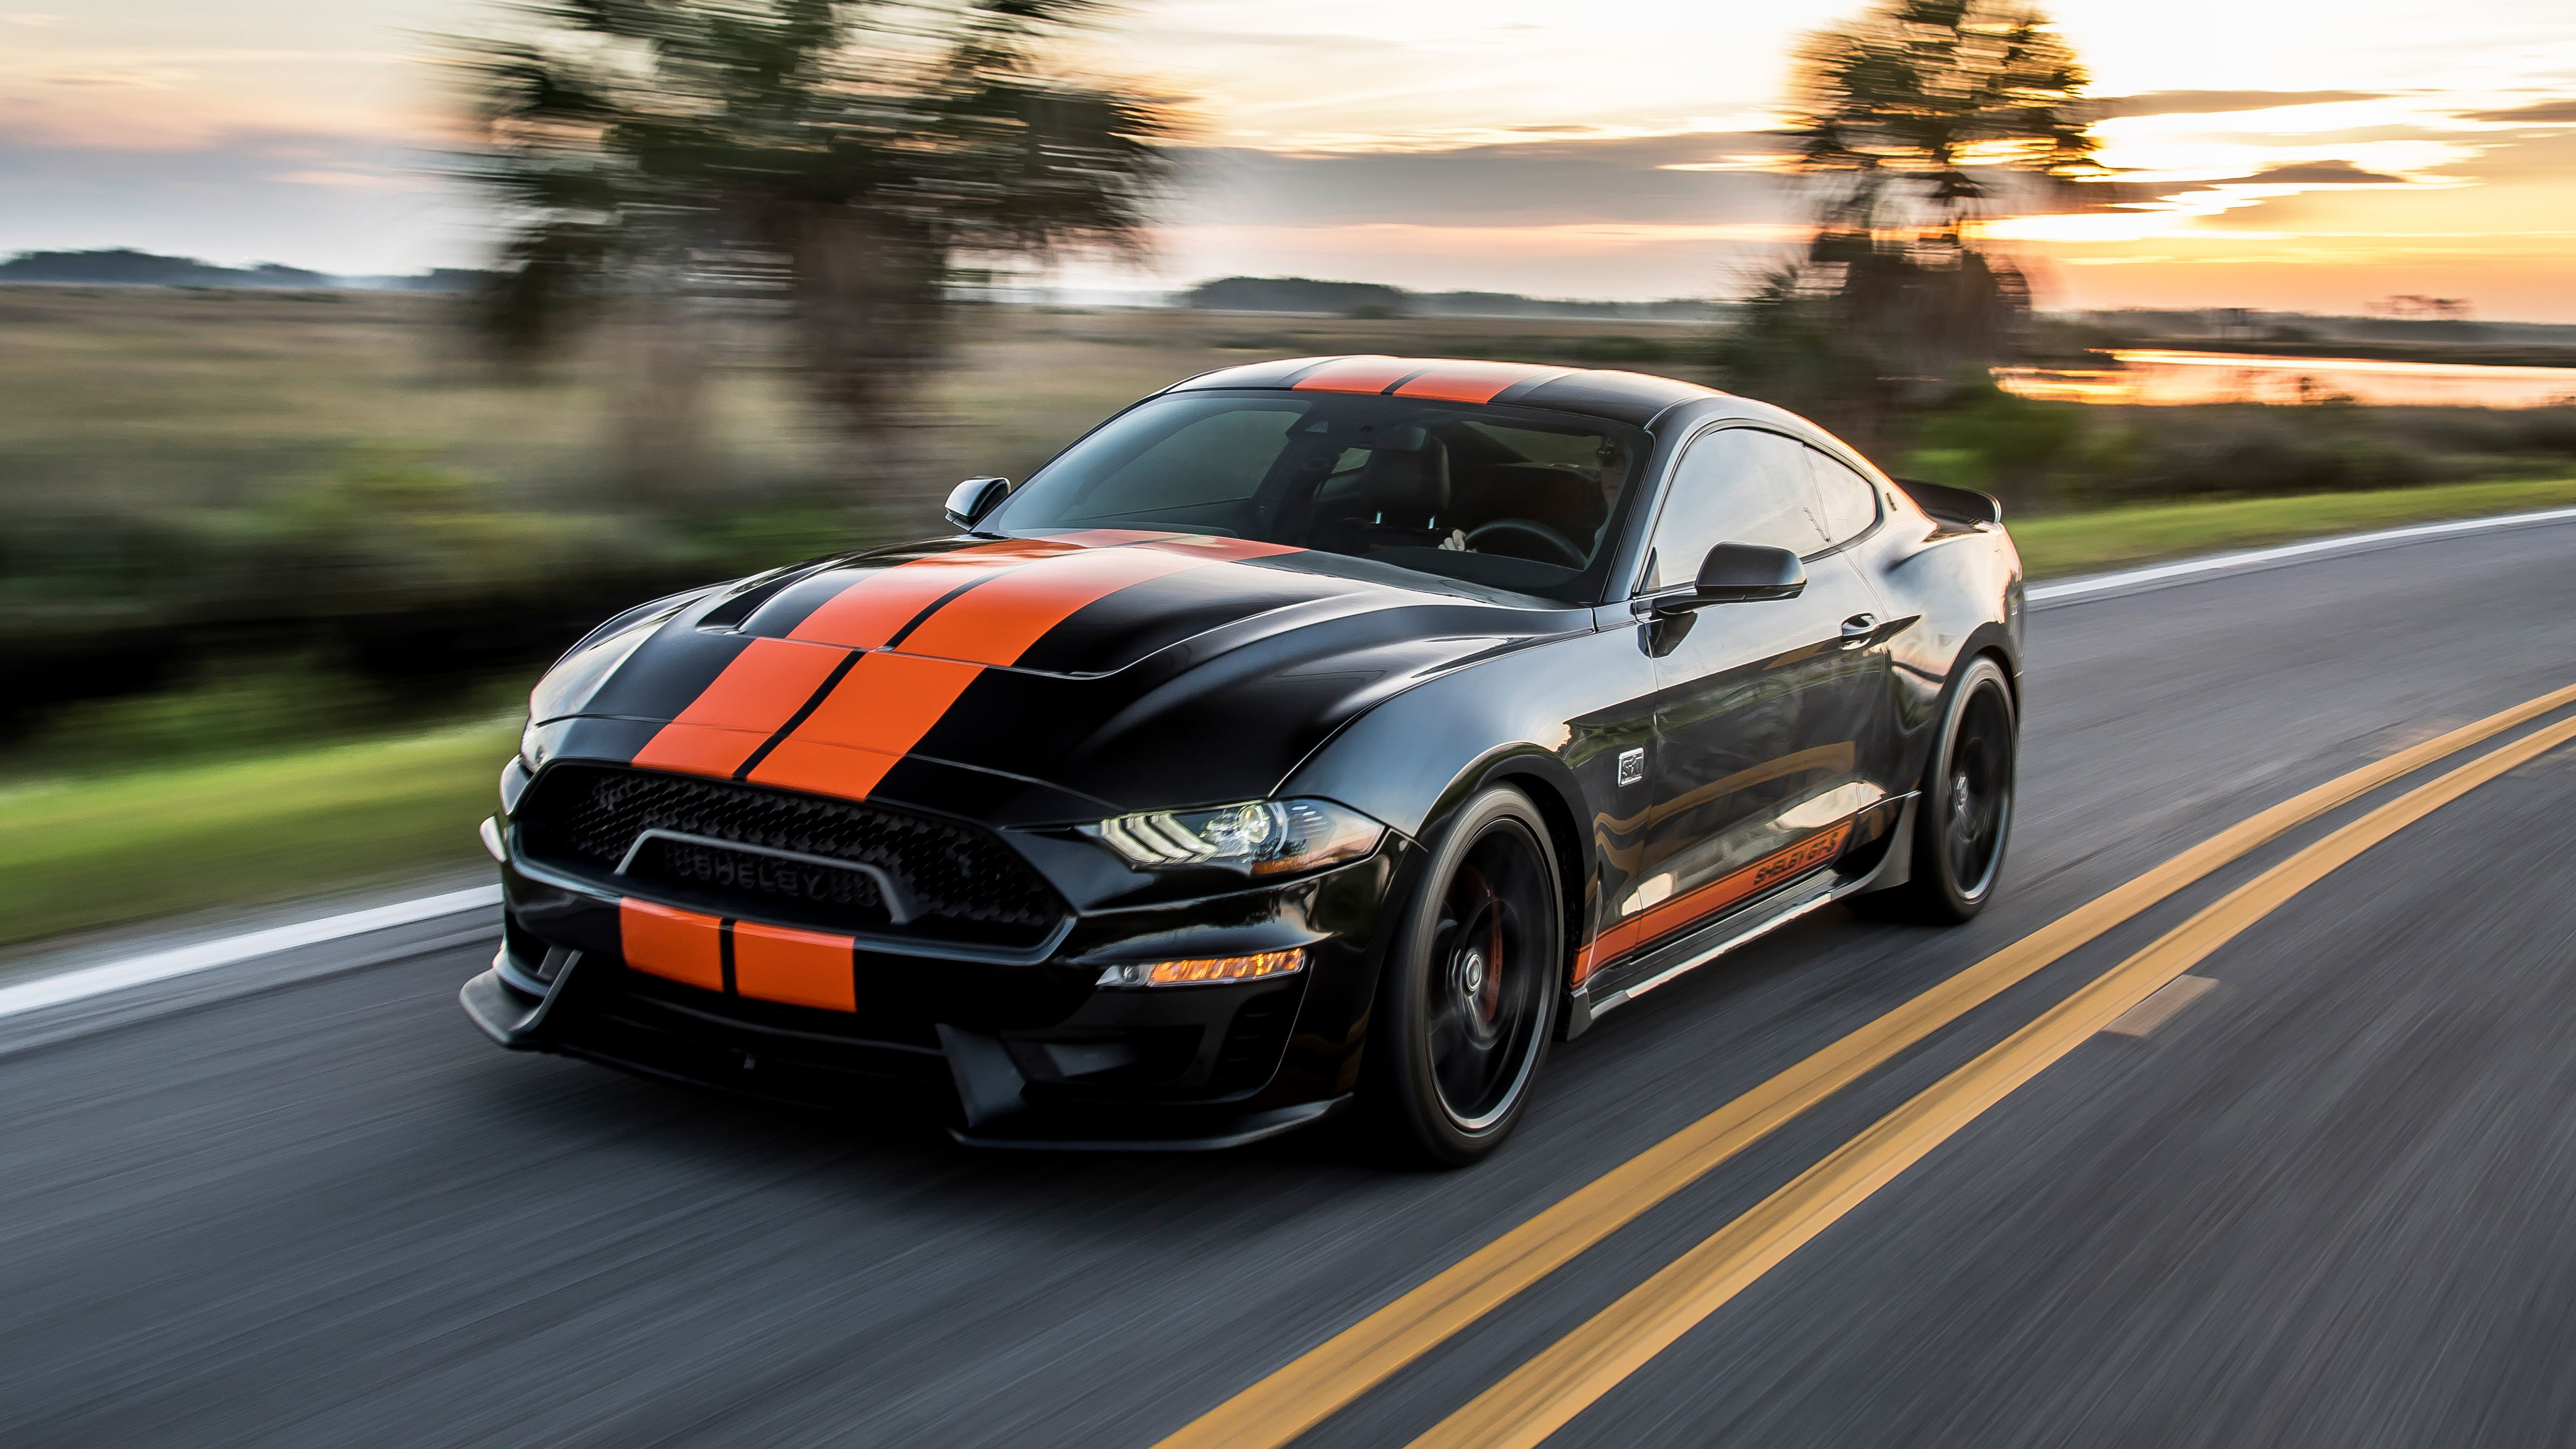 2019 Shelby Ford Mustang GT-S 4K Wallpaper | HD Car Wallpapers | ID #13075